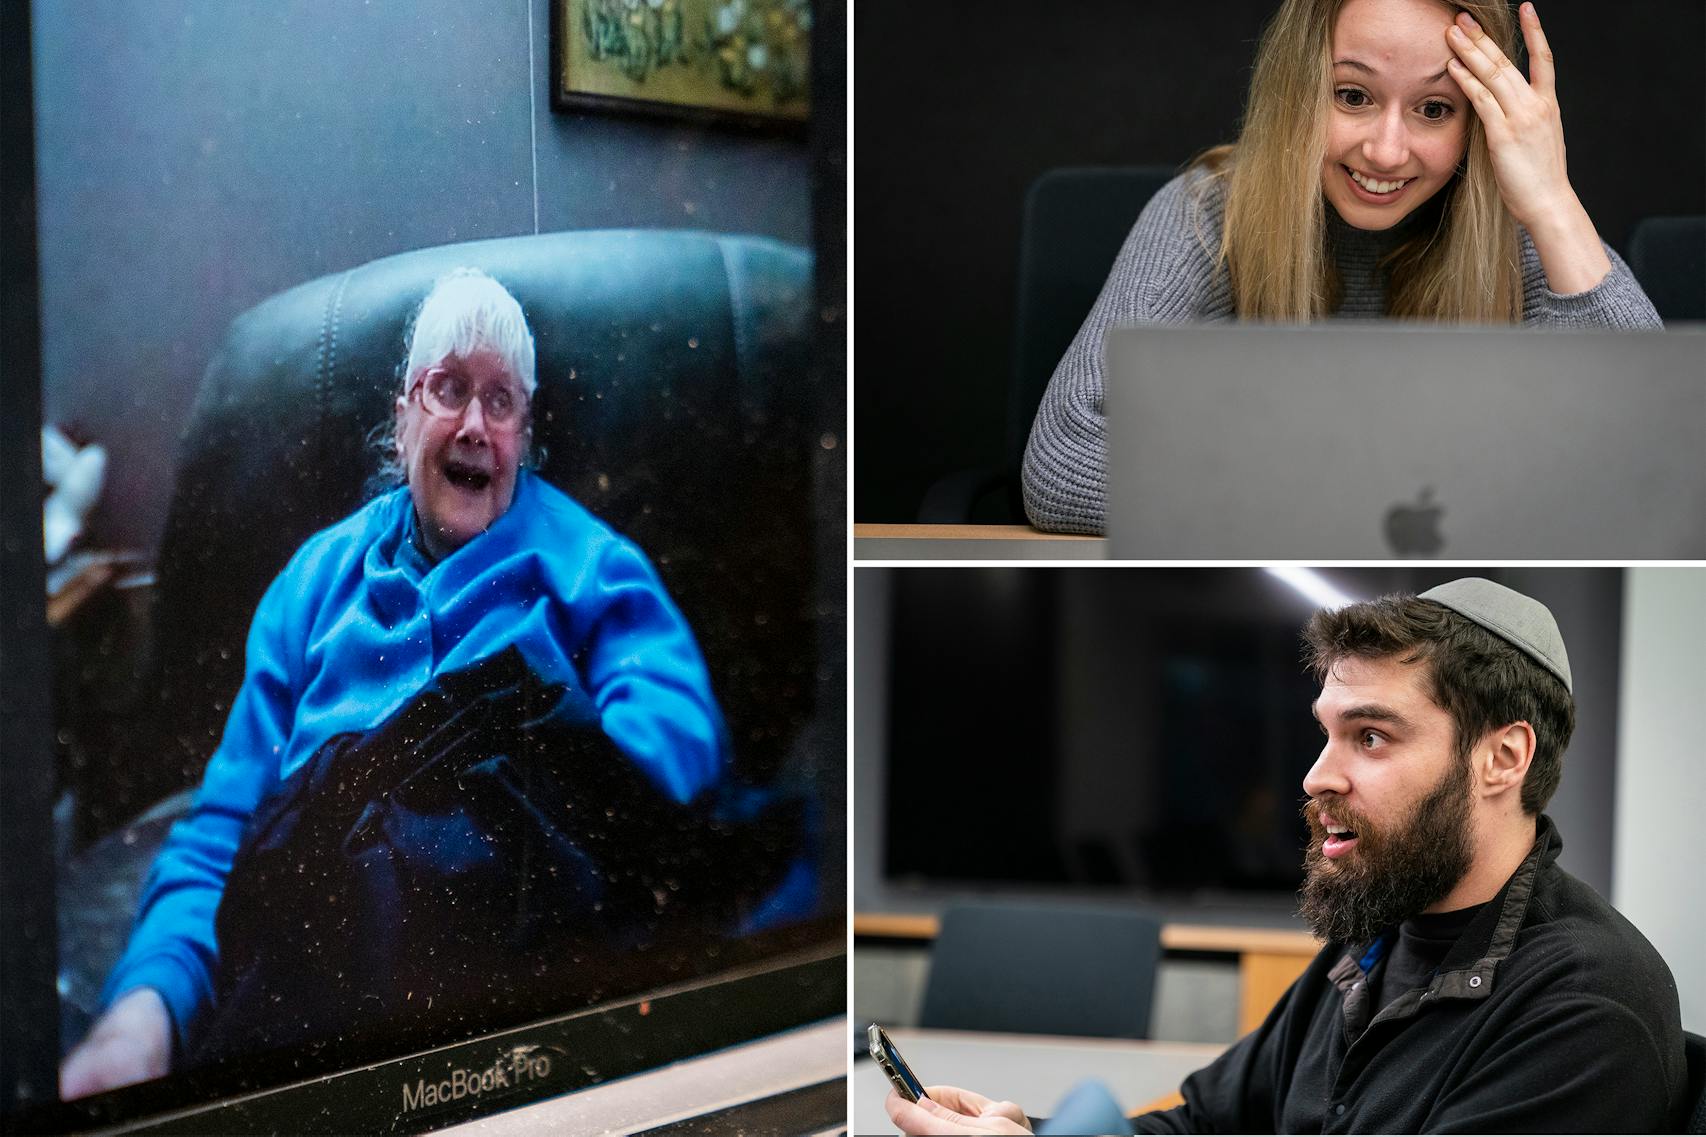 Right: Merry Trapp, an 81-year-old resident of a senior home in Green Bay, Wis. video chats with volunteer Sammi Martín, 18. Bottom: Ian Aizman has set up a volunteer network, named Virtual Visit Friend, to chat with seniors who are quarantined without visitors in senior homes across the country. 